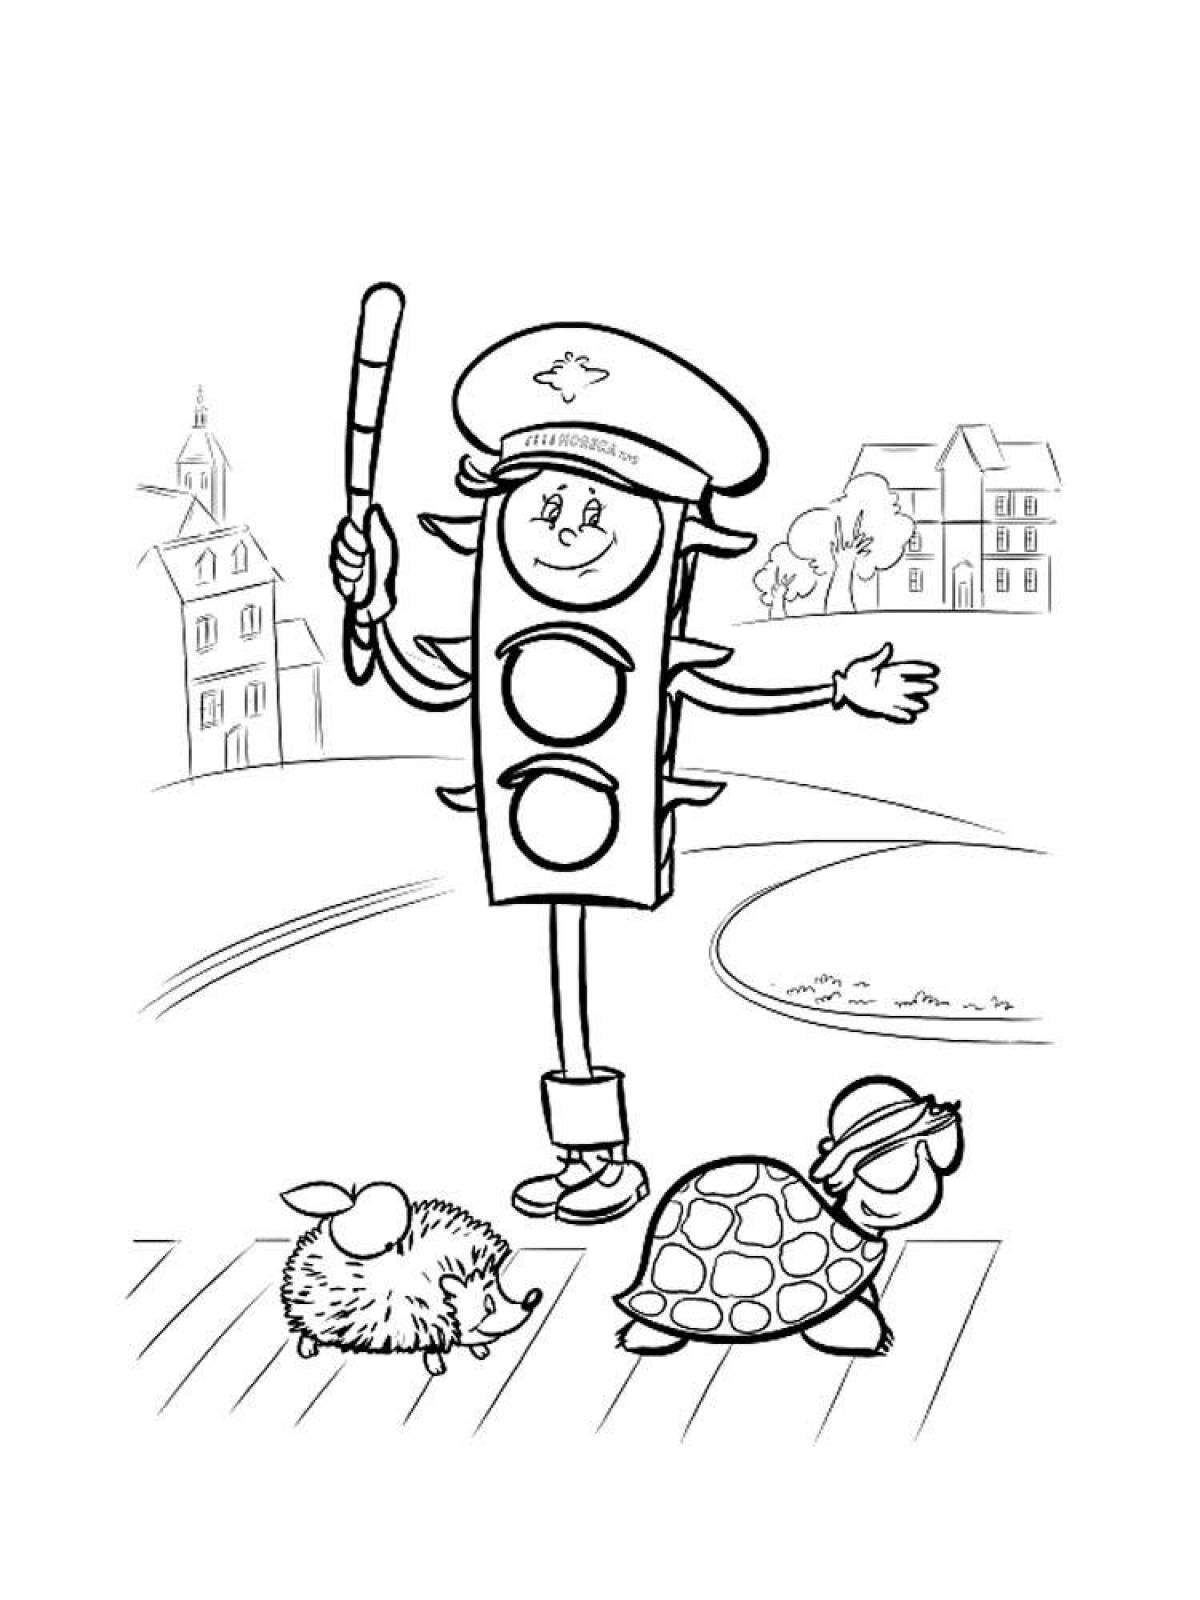 Colorful traffic light coloring page for 6-7 year olds